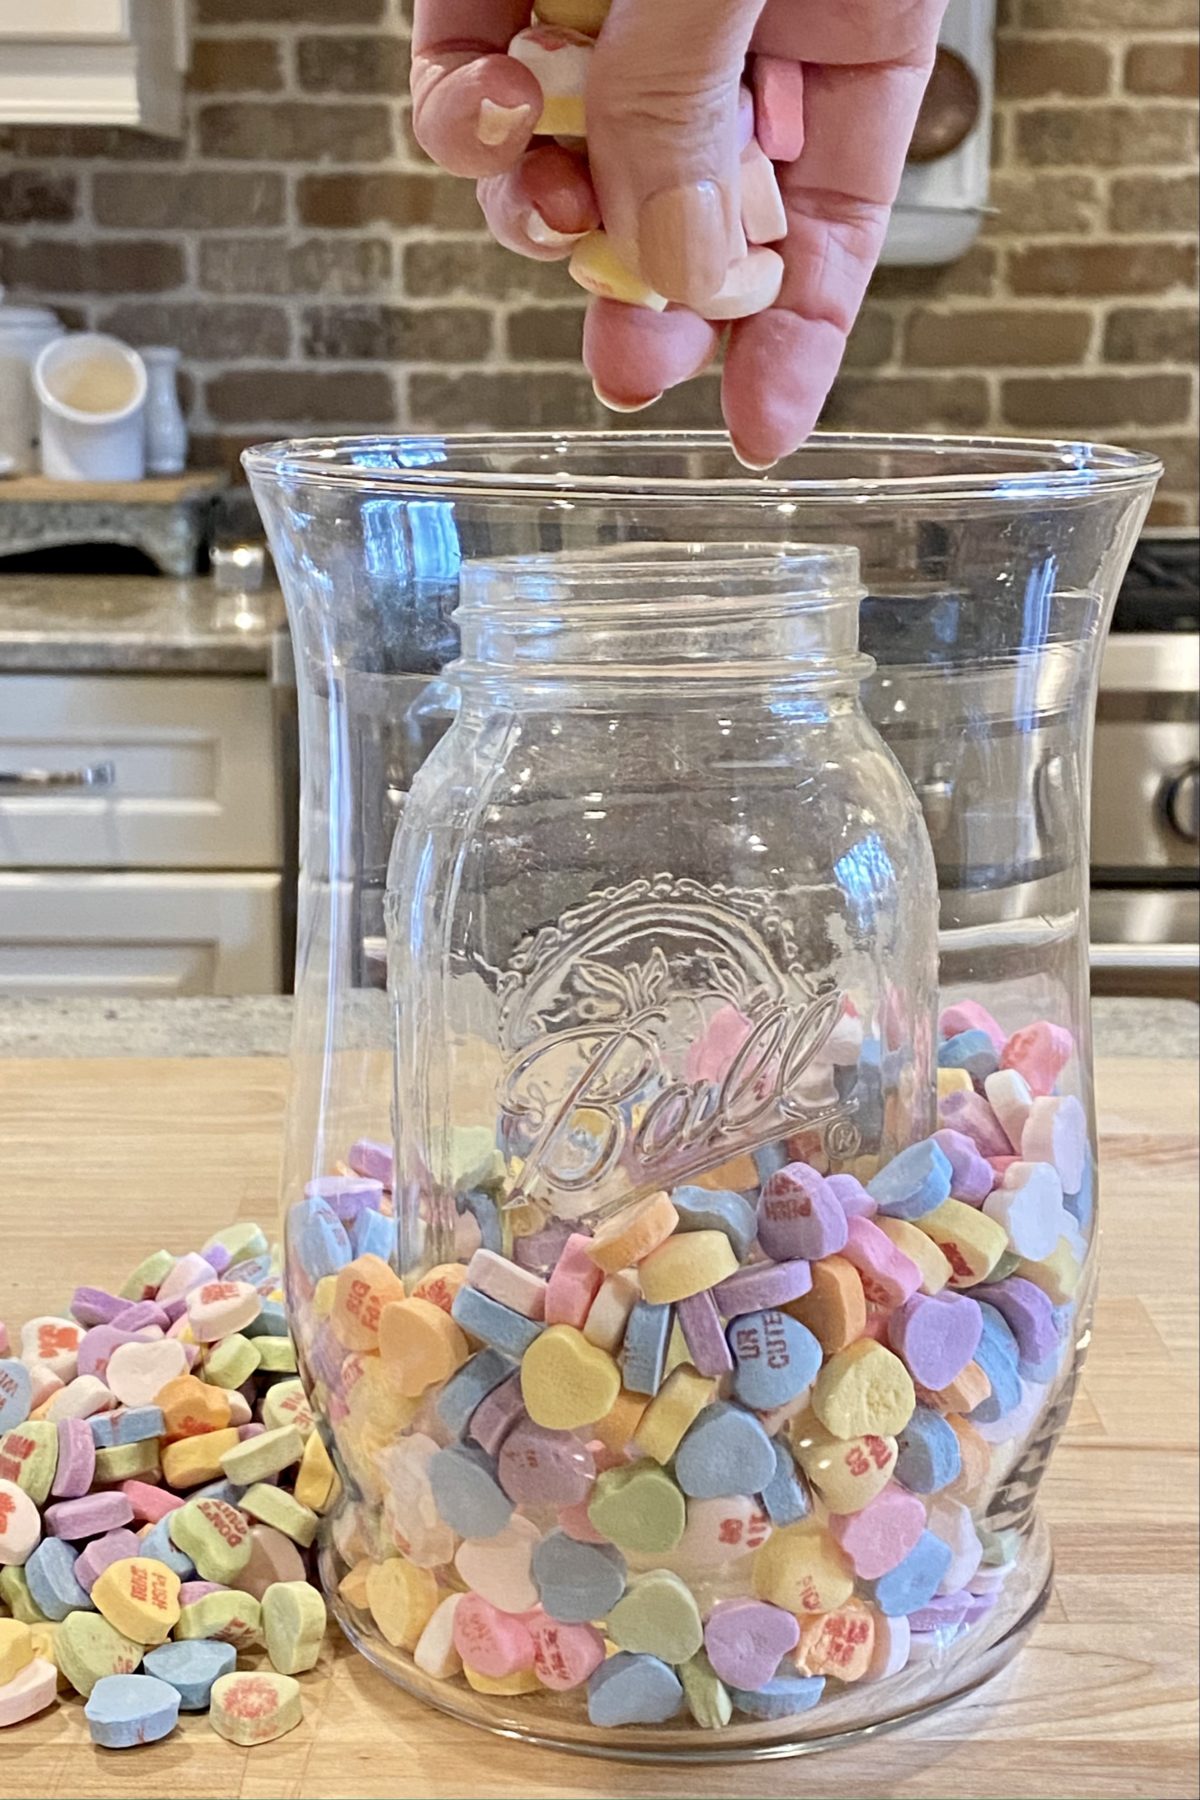 Filling the vase with candy hearts in between the large vase and the vase inside. 